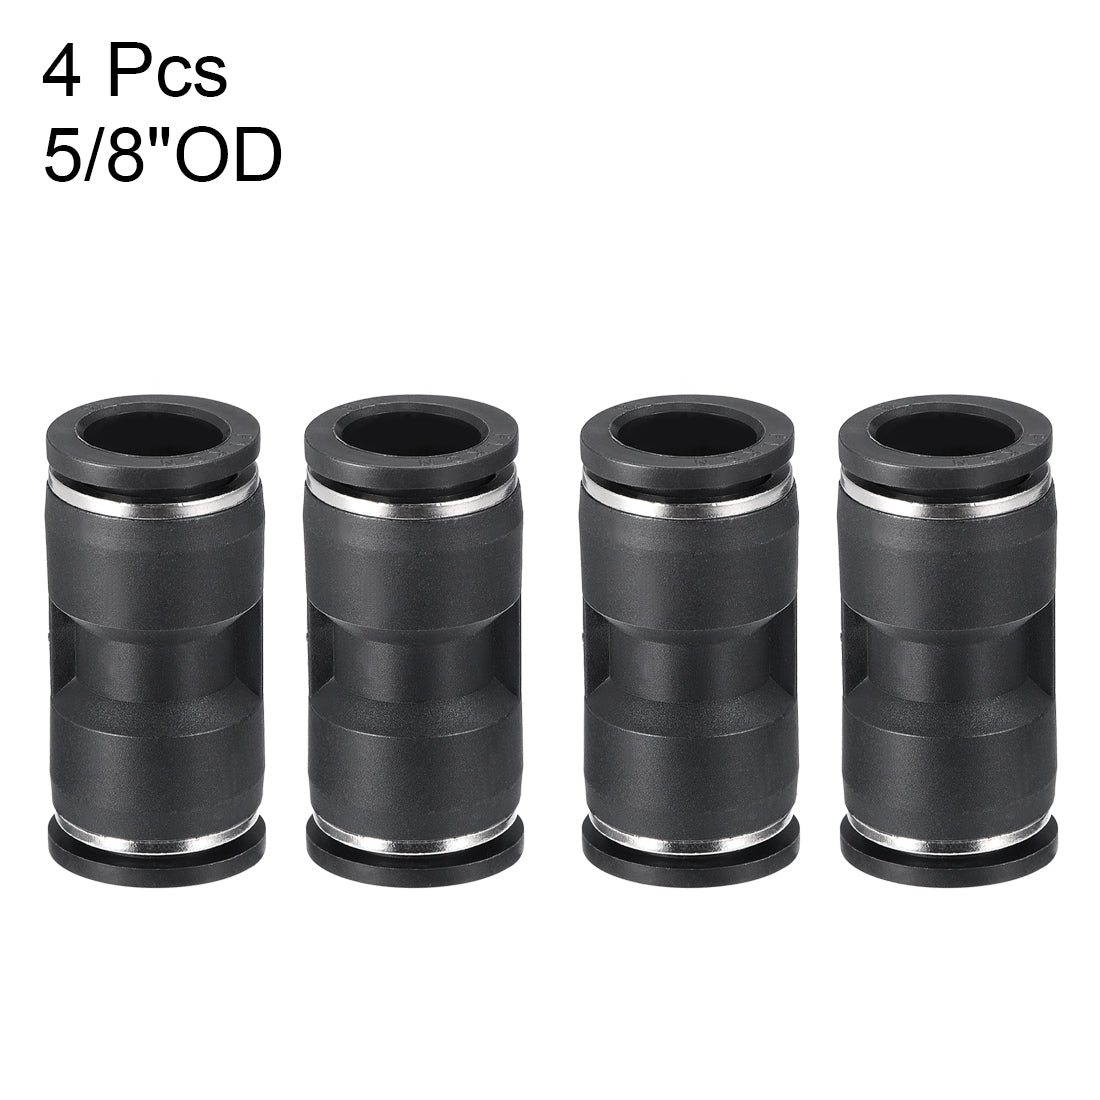 uxcell Uxcell Push to Connect Fittings Tube Connect 16mm or 5/8" Straight od Push Fit Fittings Tube Fittings Push Lock 4pcs